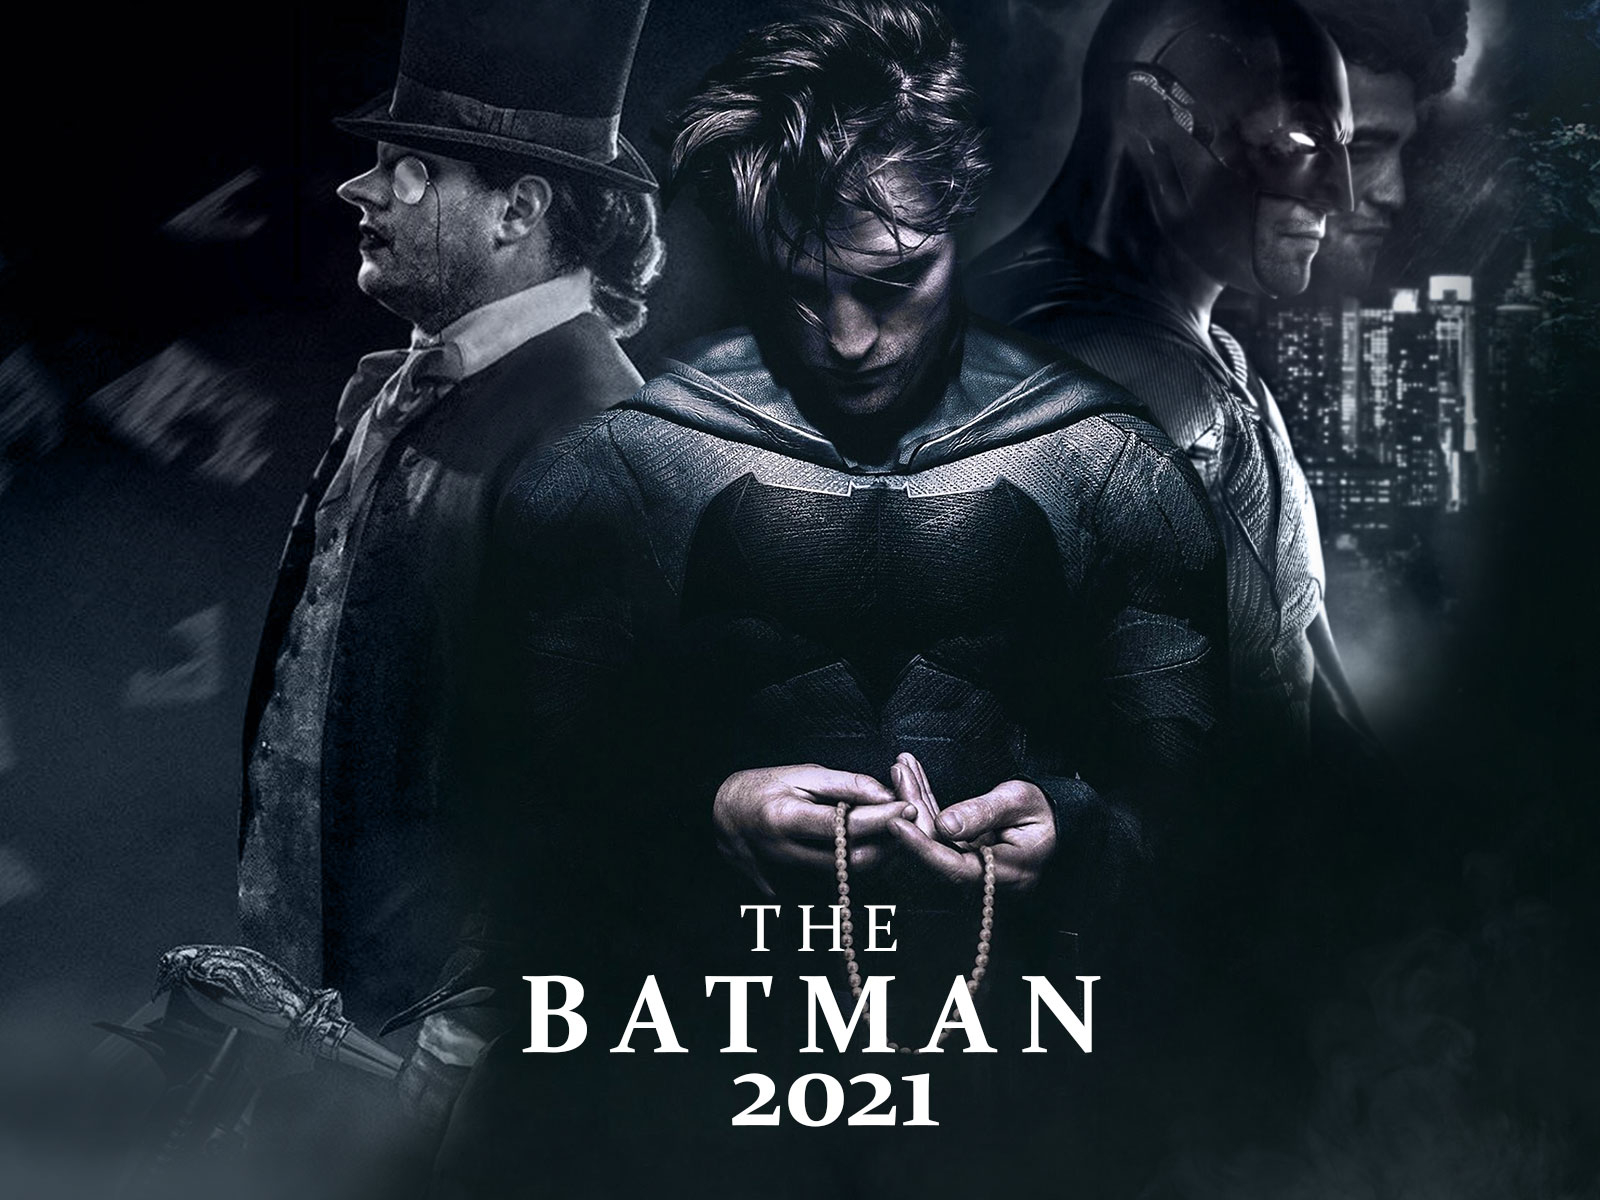 The Batman 2021 Movie Poster Edit by AnyJson on Dribbble